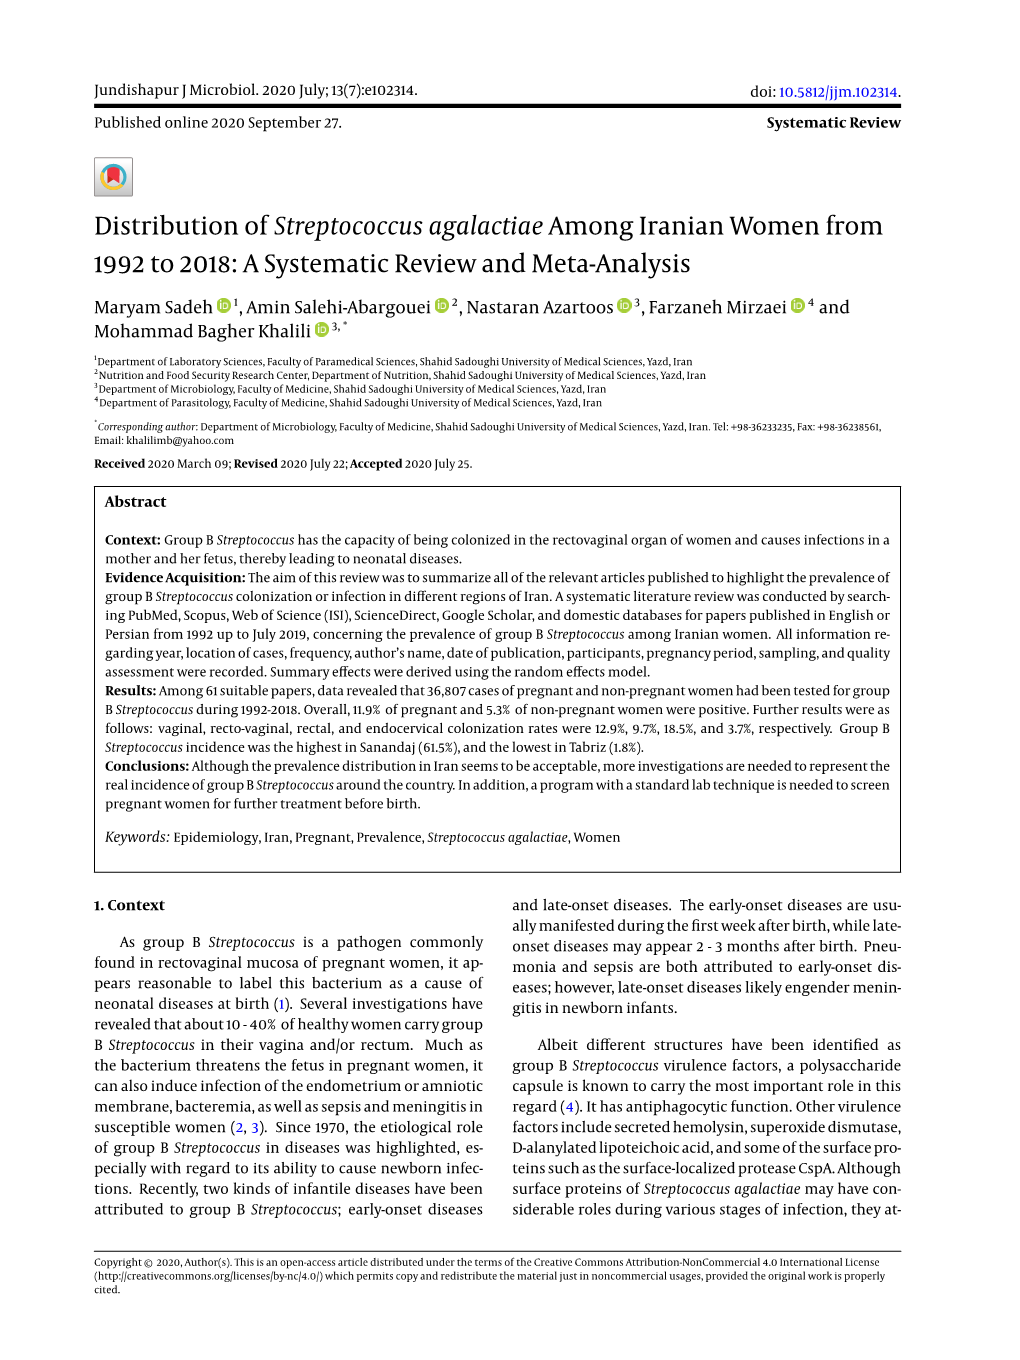 Distribution of Streptococcus Agalactiae Among Iranian Women from 1992 to 2018: a Systematic Review and Meta-Analysis